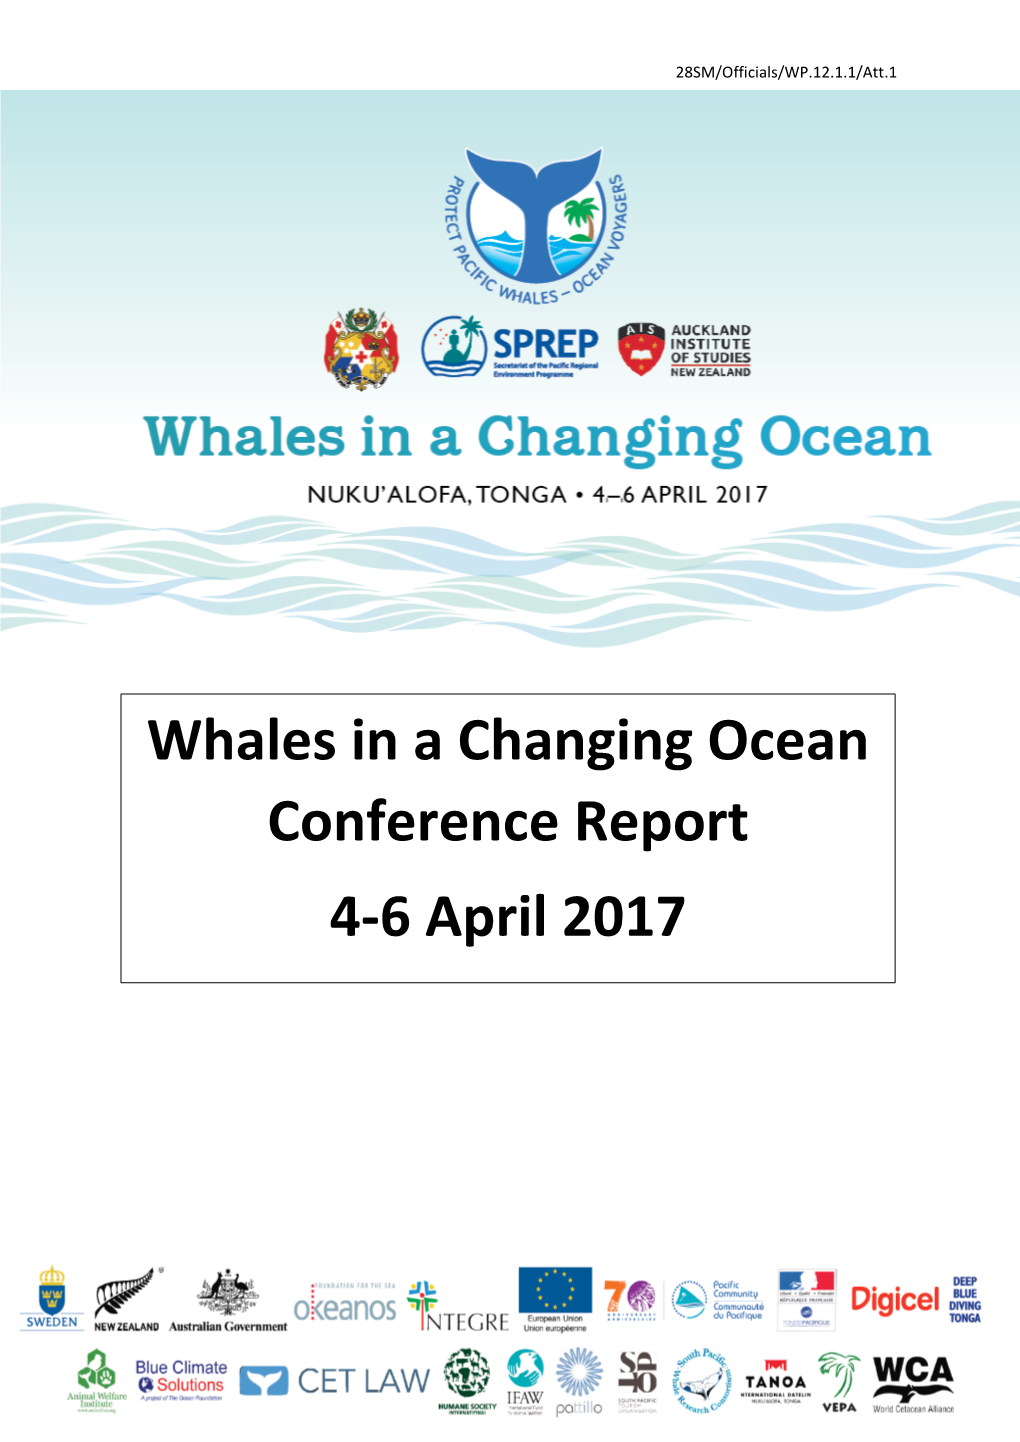 Whales in a Changing Ocean Conference Report 4-6 April 2017